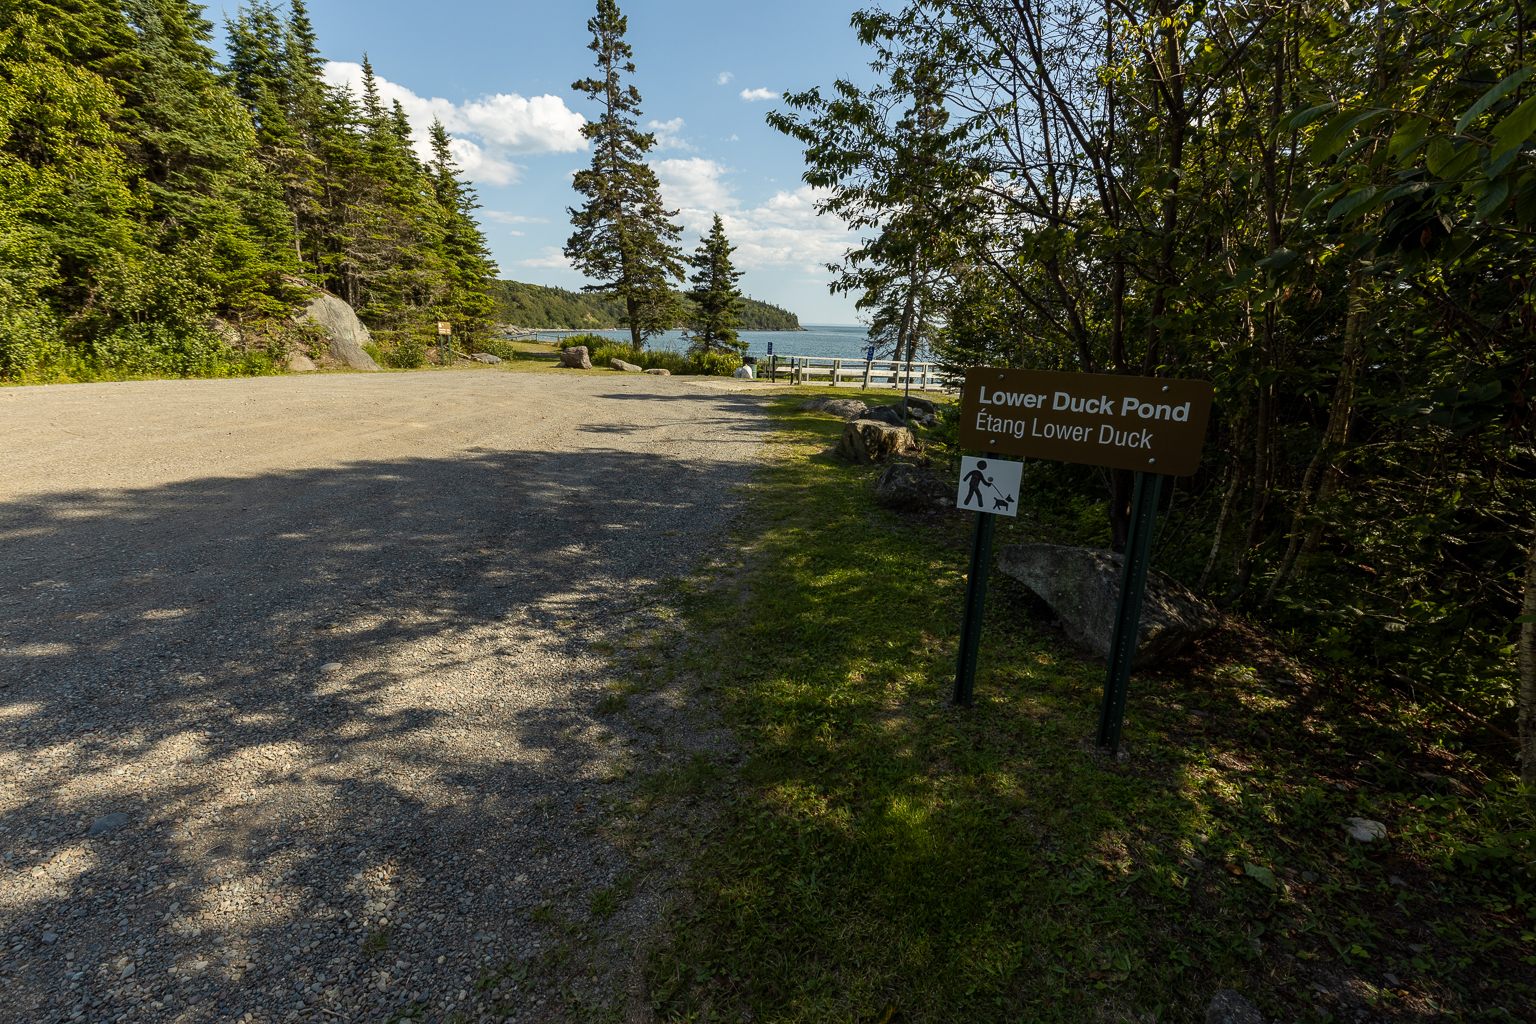 Parking lot at Lower Duck Pond Beach